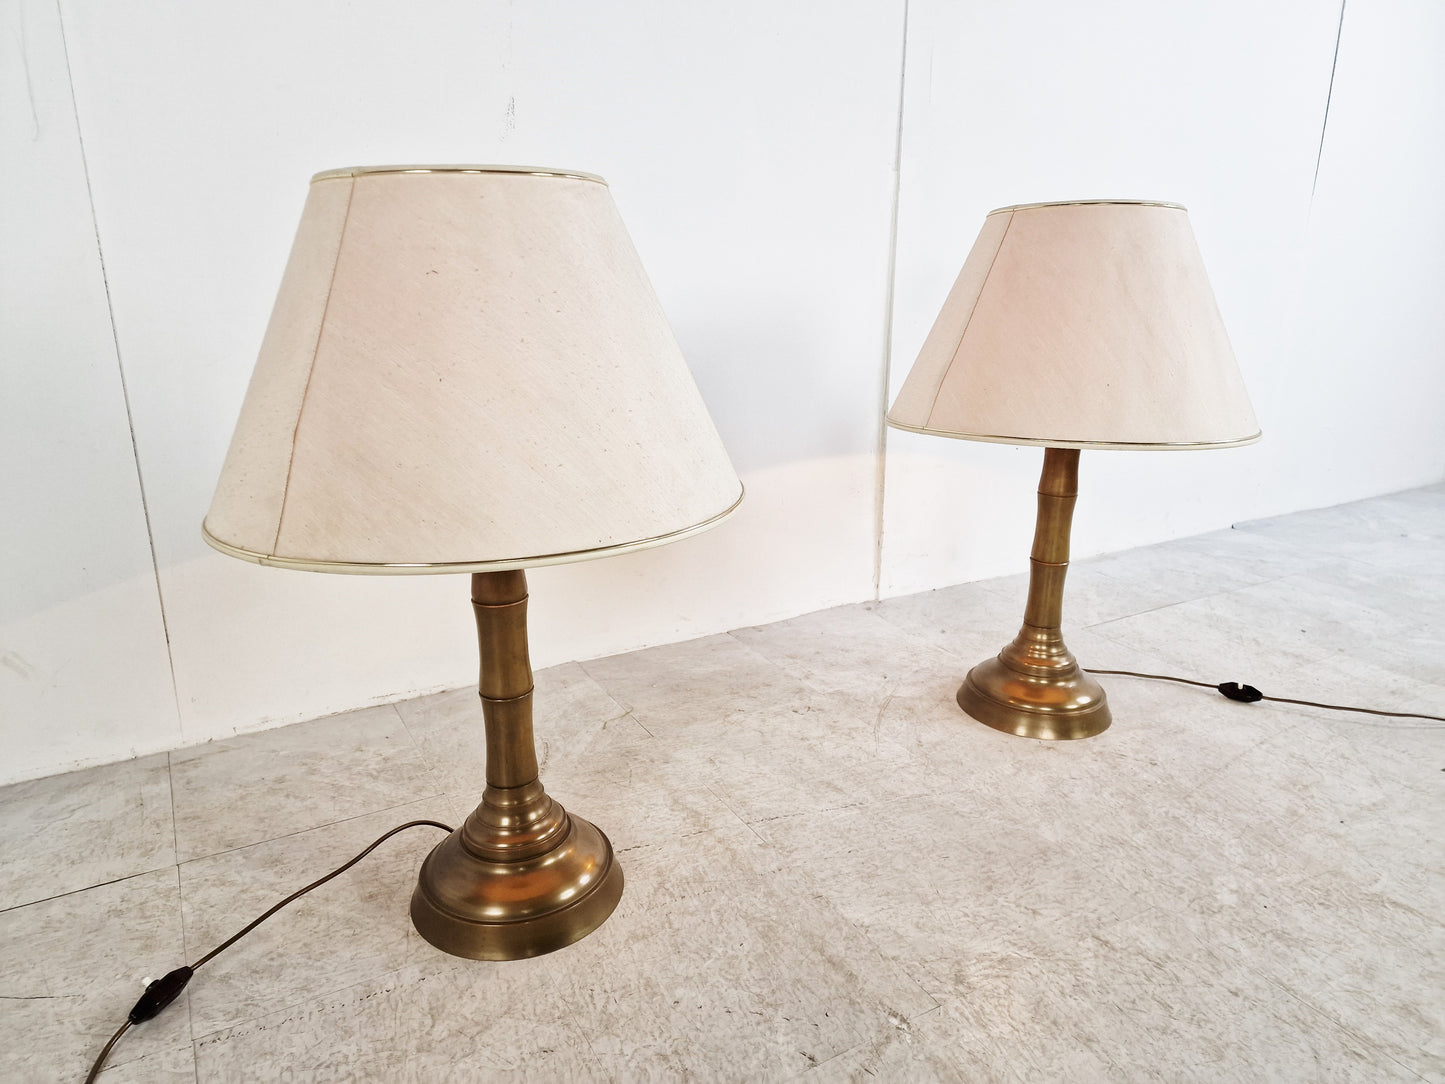 2x Bamboo table lamps